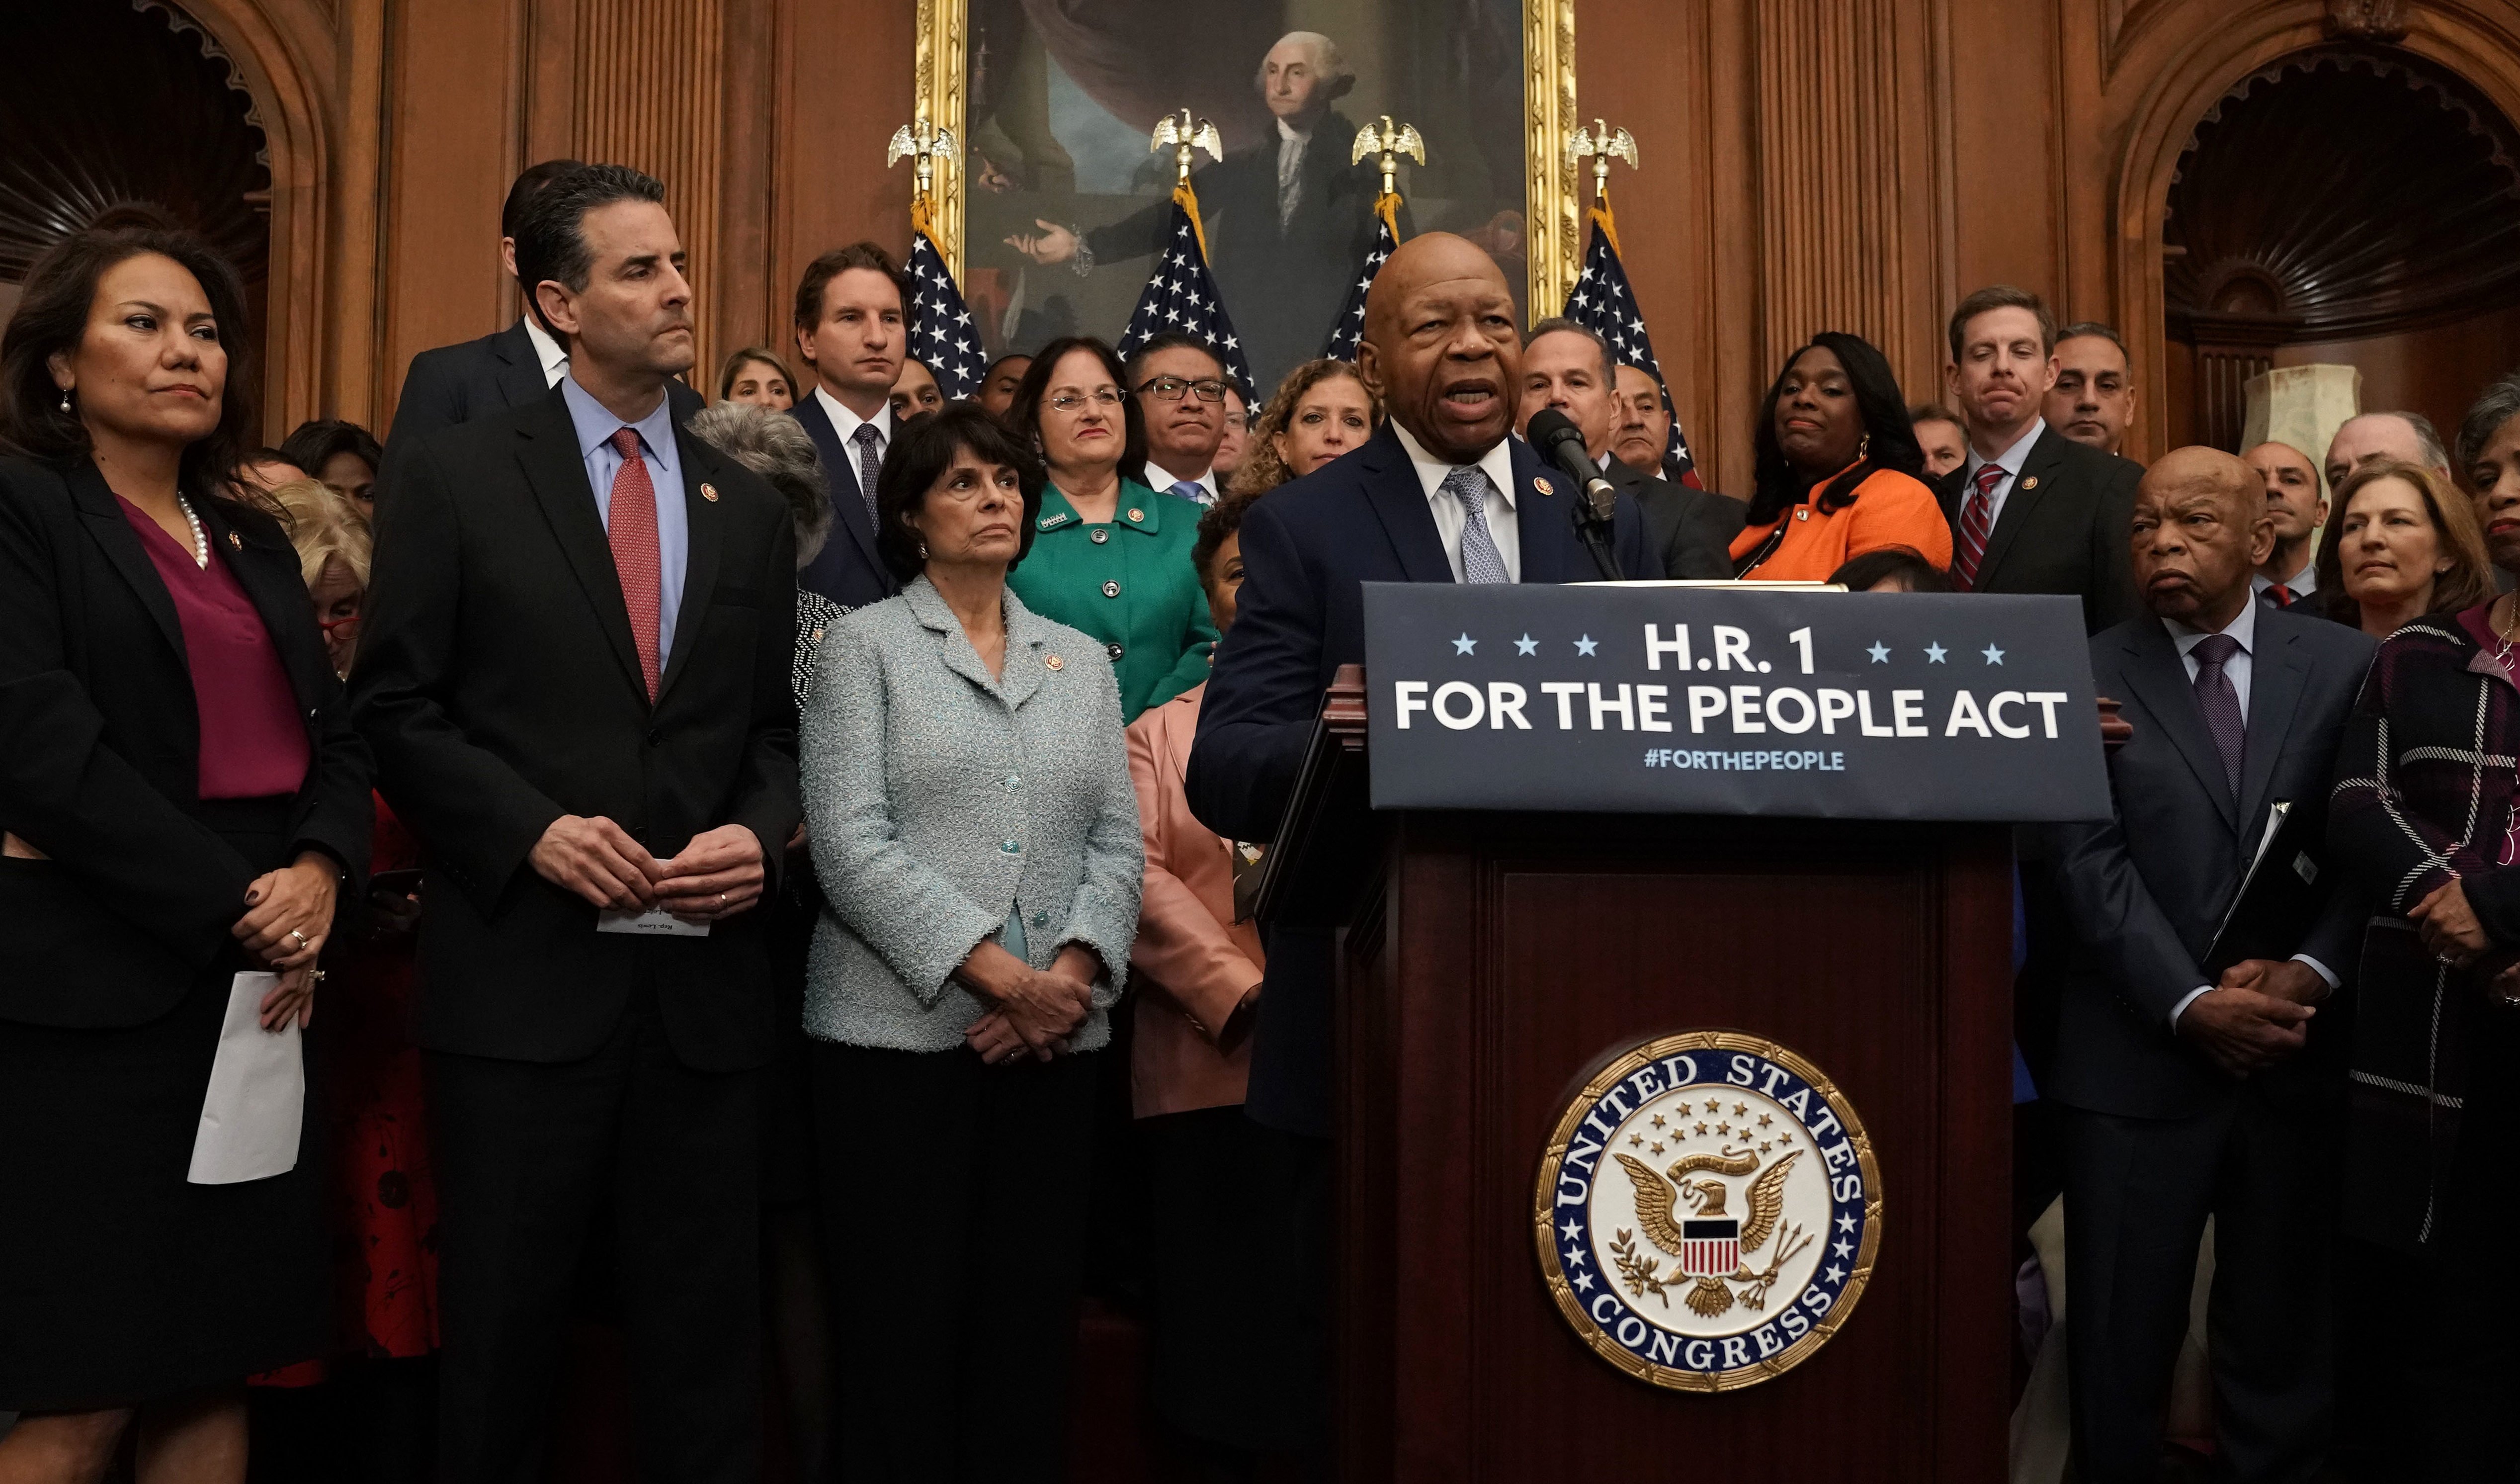 U.S. Rep. Elijah Cummings (D-MD) speaks during a news conference at the U.S. Capitol January 4, 2019 in Washington, DC. U.S. Speaker of the House Rep. Nancy Pelosi (D-CA) held a news conference to introduce H.R.1, the "For the People Act," a reform package "to restore the promise of our nation's democracy, end the culture of corruption in Washington, and reduce the role of money in politics to return the power back to the American people." (Photo by Alex Wong/Getty Images)